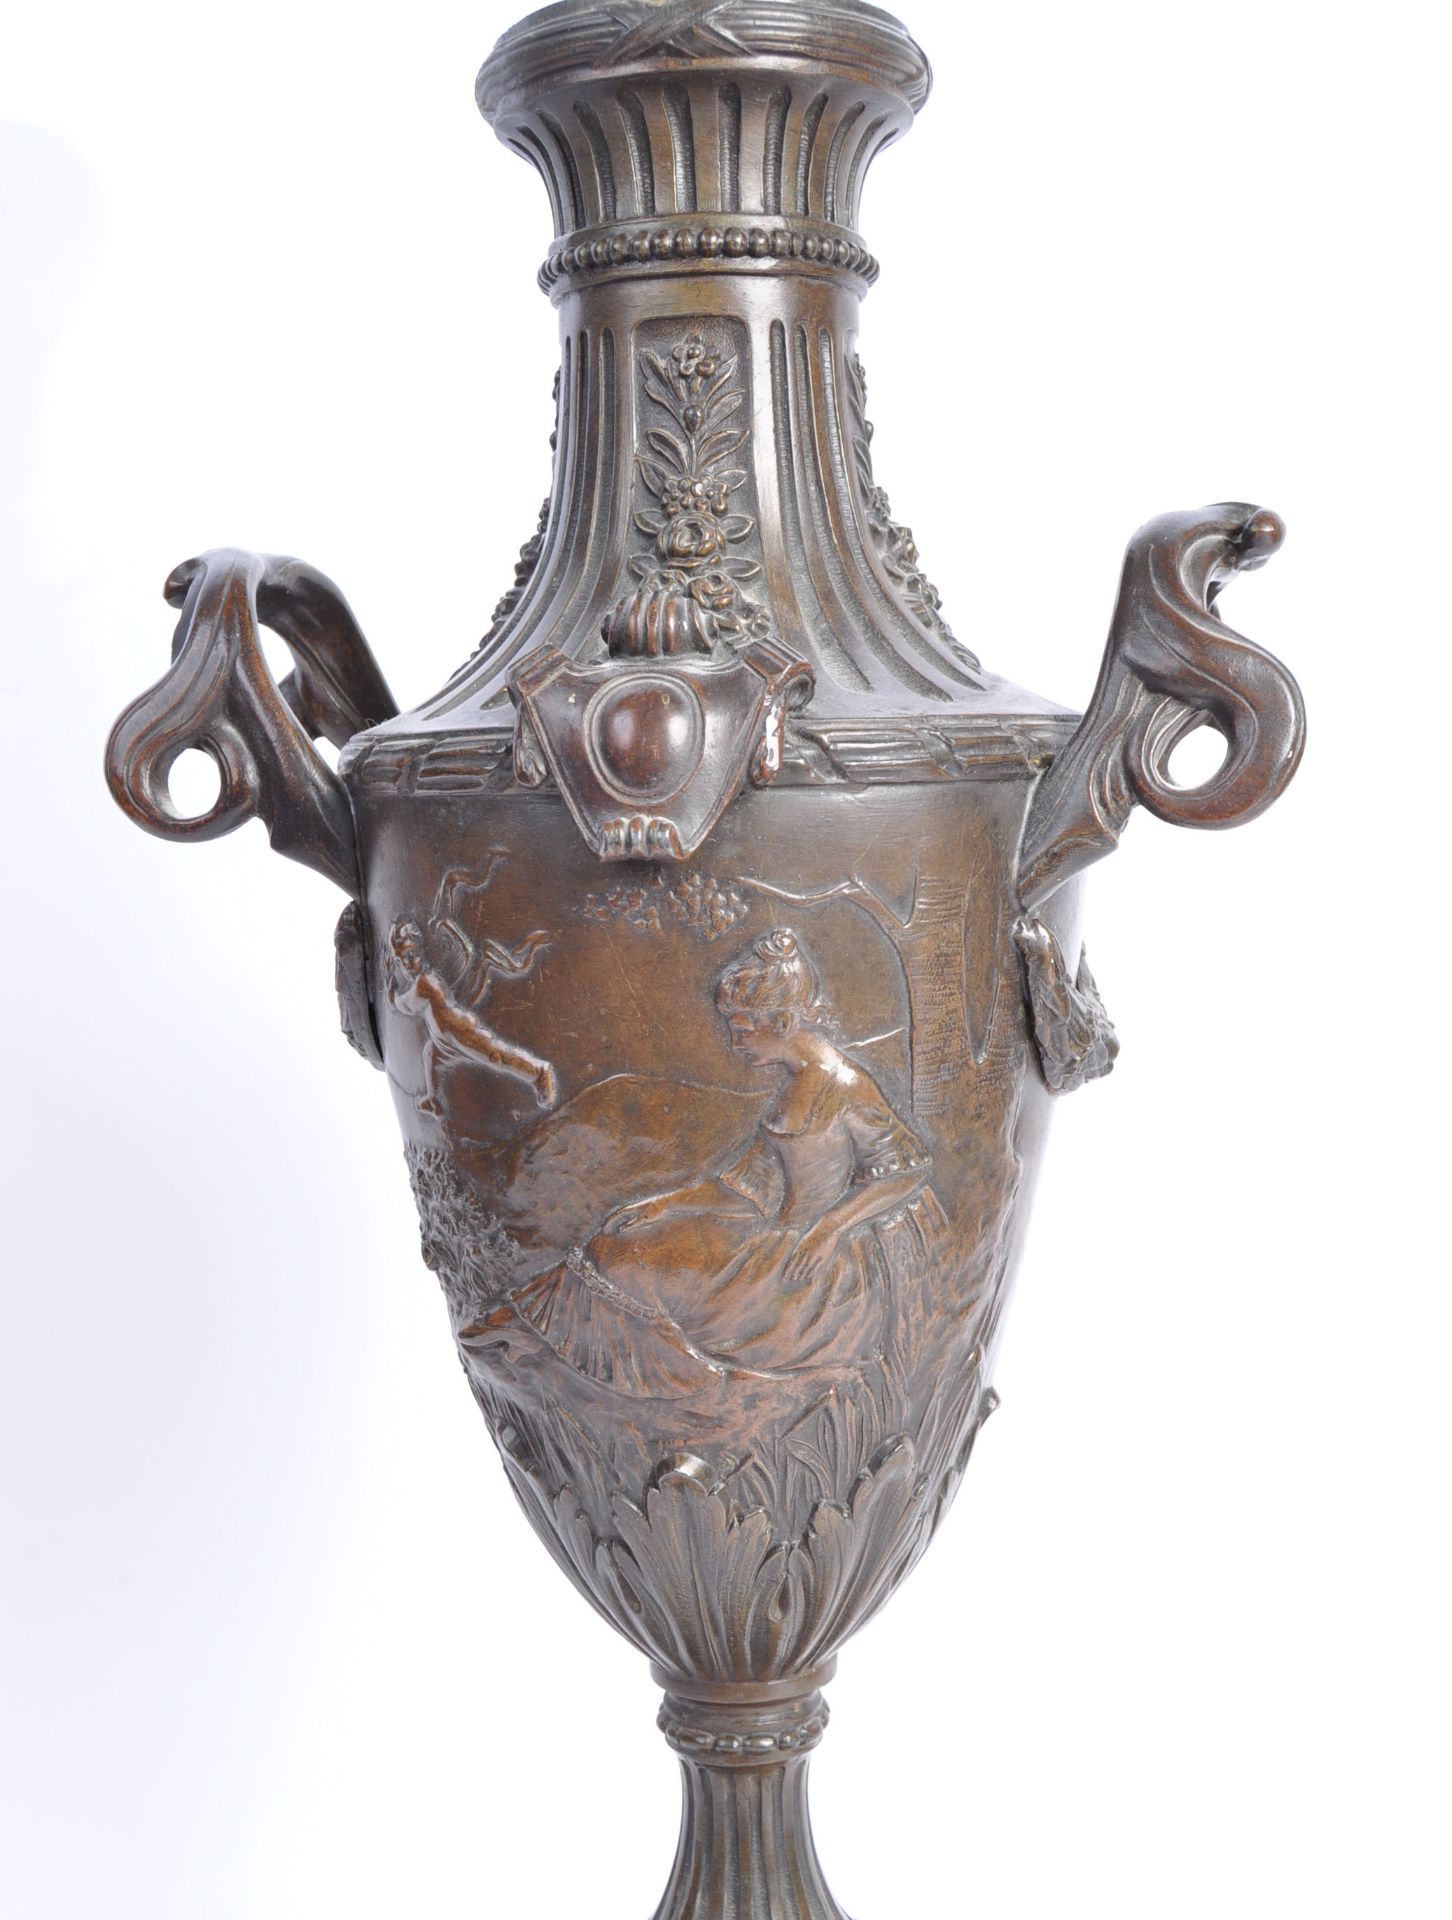 19TH CENTURY FRENCH BRONZE ART NOUVEAU TABLE LAMP - Image 4 of 7